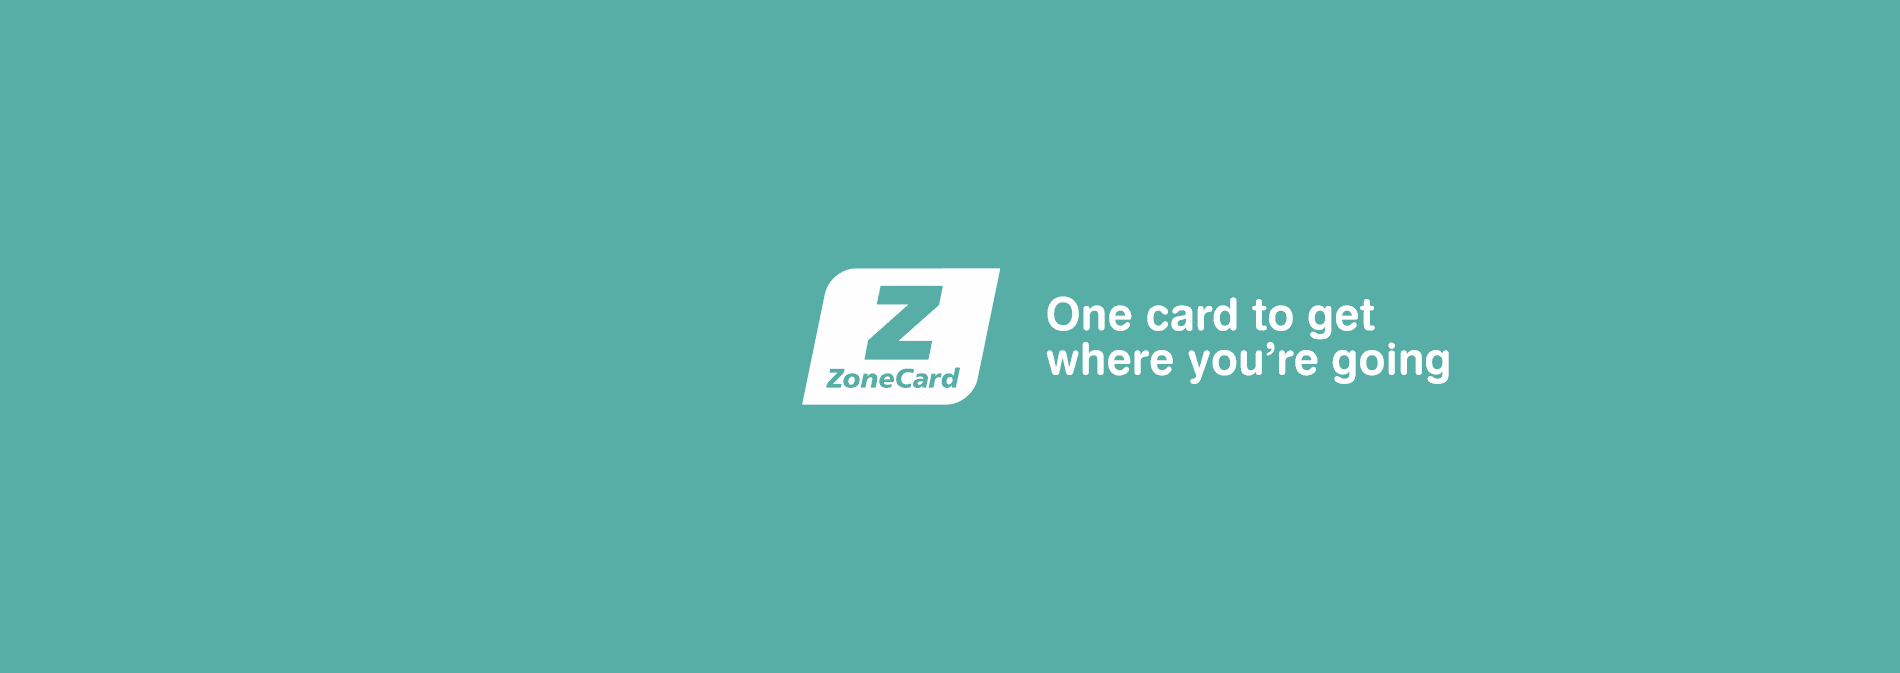 Zonecard One Card To Get Where You're Going Alt